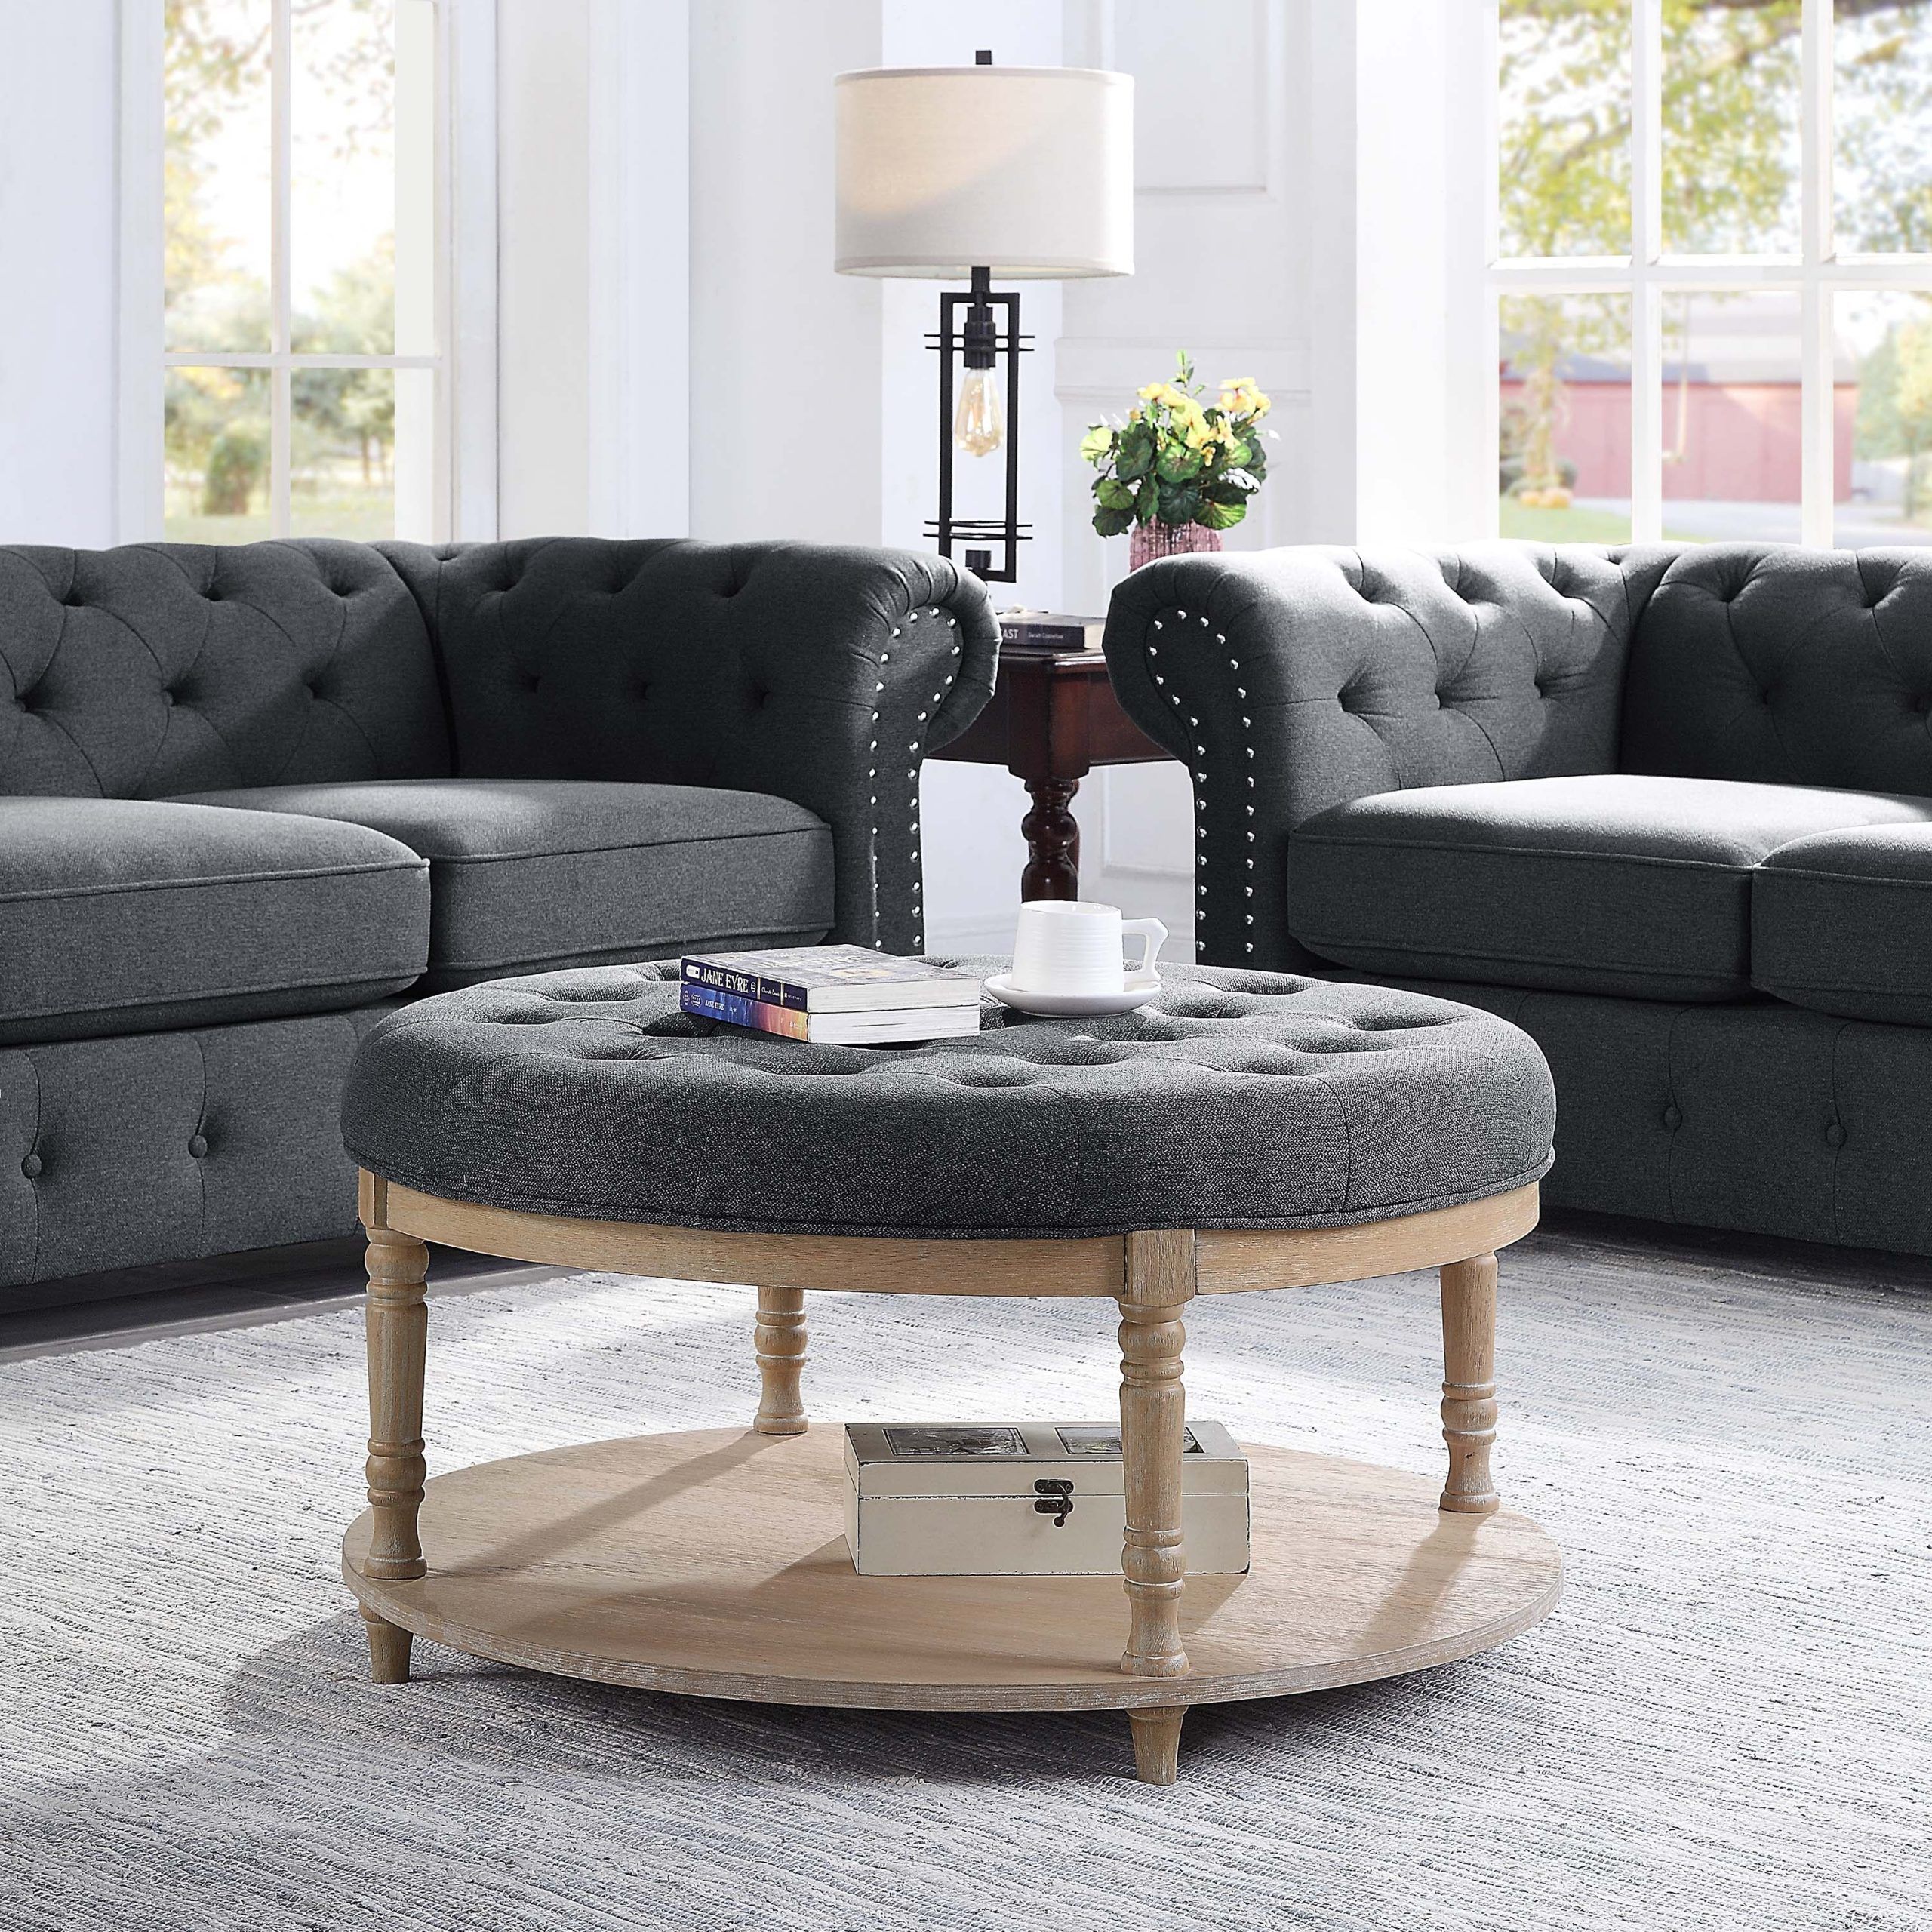 Corvus Savannah 36 Inch Round Storage Tufted Chesterfield Cocktail Ottoman  – Overstock – 33992910 Within 36 Inch Round Ottomans (View 3 of 15)